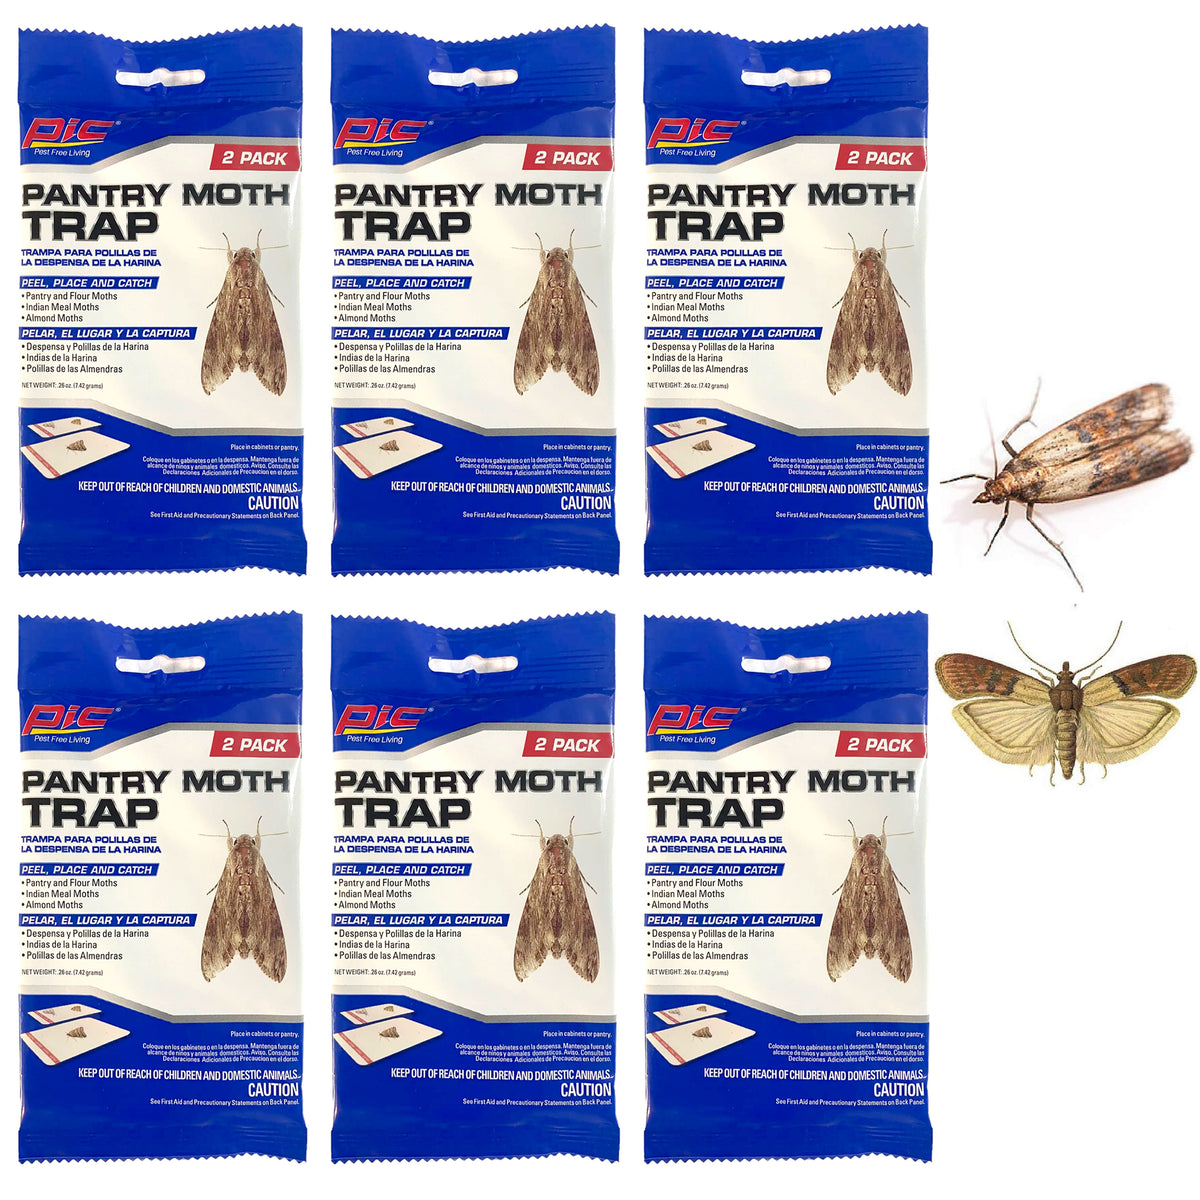 12 PC Pantry Moth Trap Glue Board Catch Indian Meal Flour Food Moths Sticky Bait, Blue